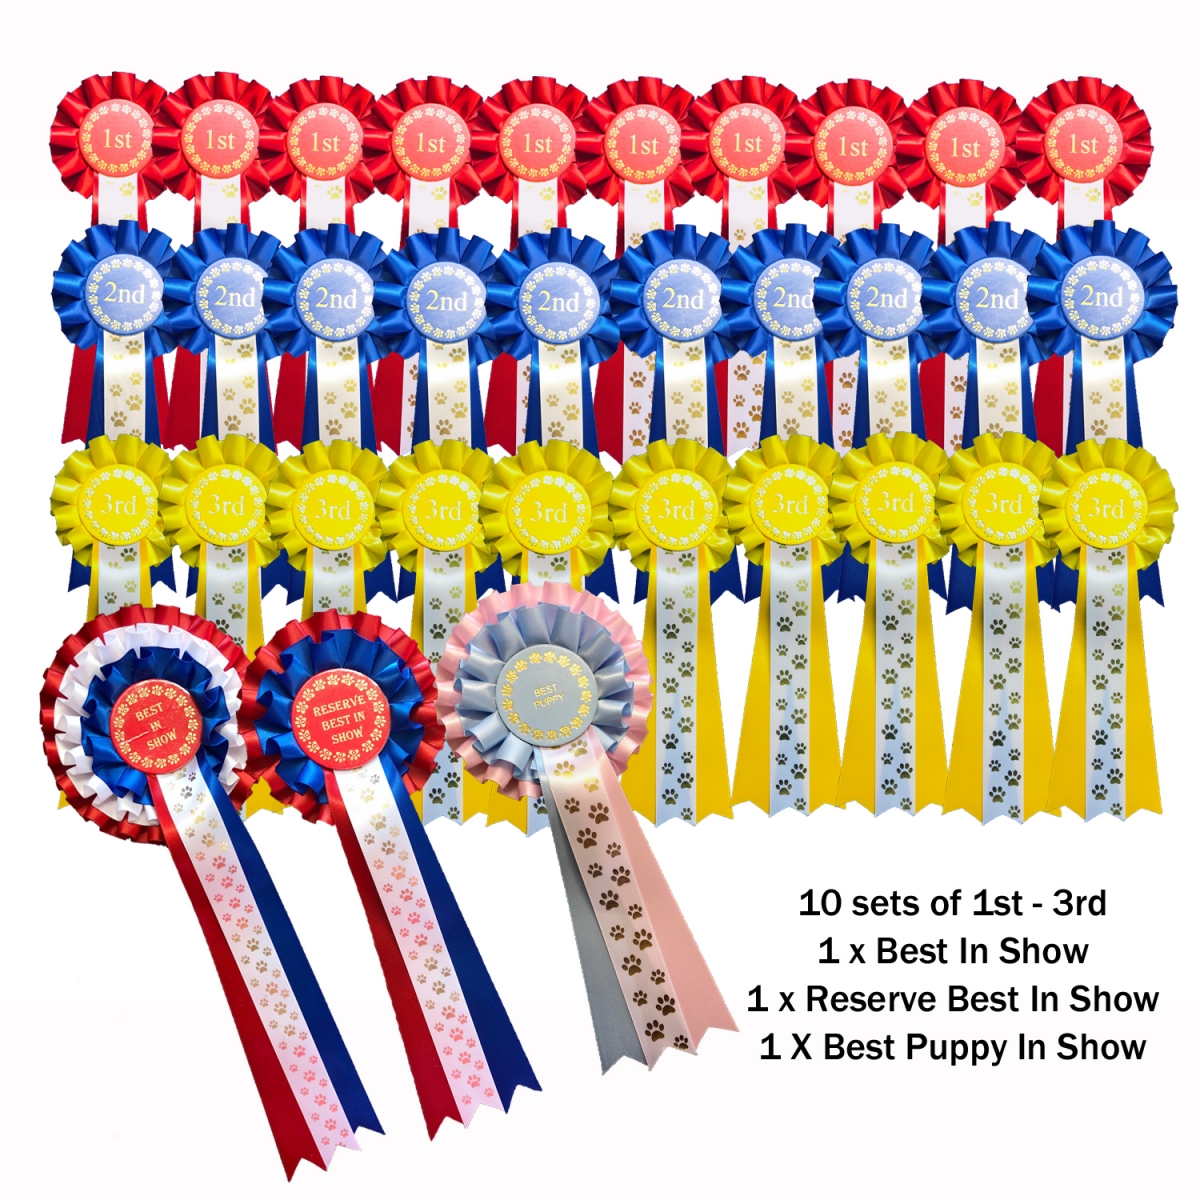 3rd Place 2 Tier Rosettes Dog Themed 5 Packs of 1st 